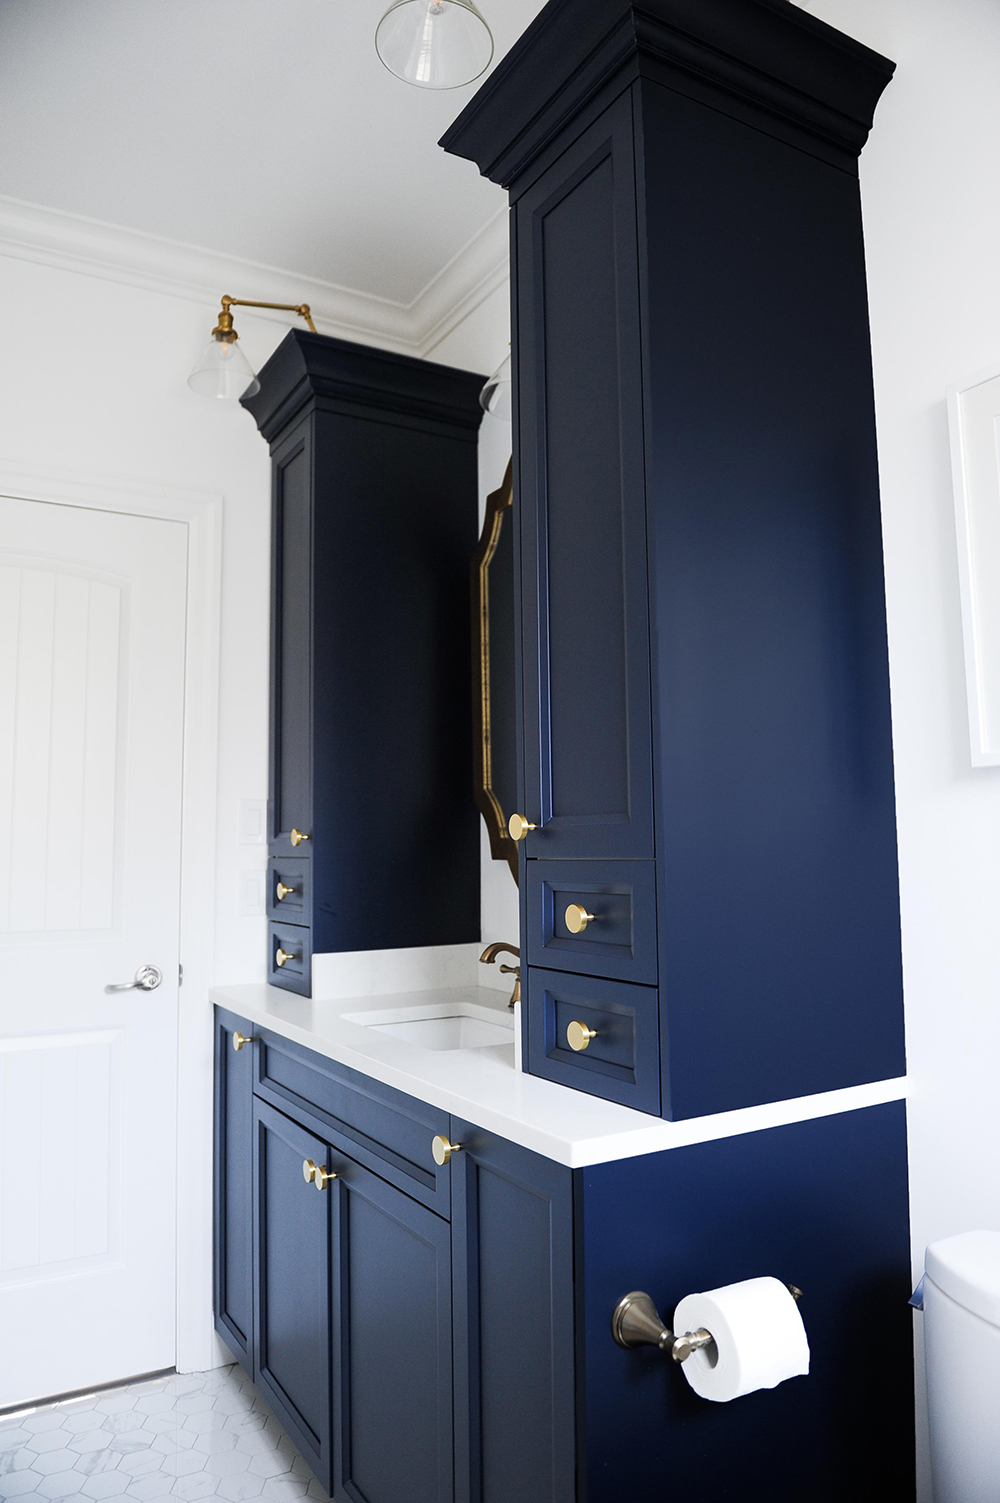 Custom cabinetry painted a dramatic shade of blue.